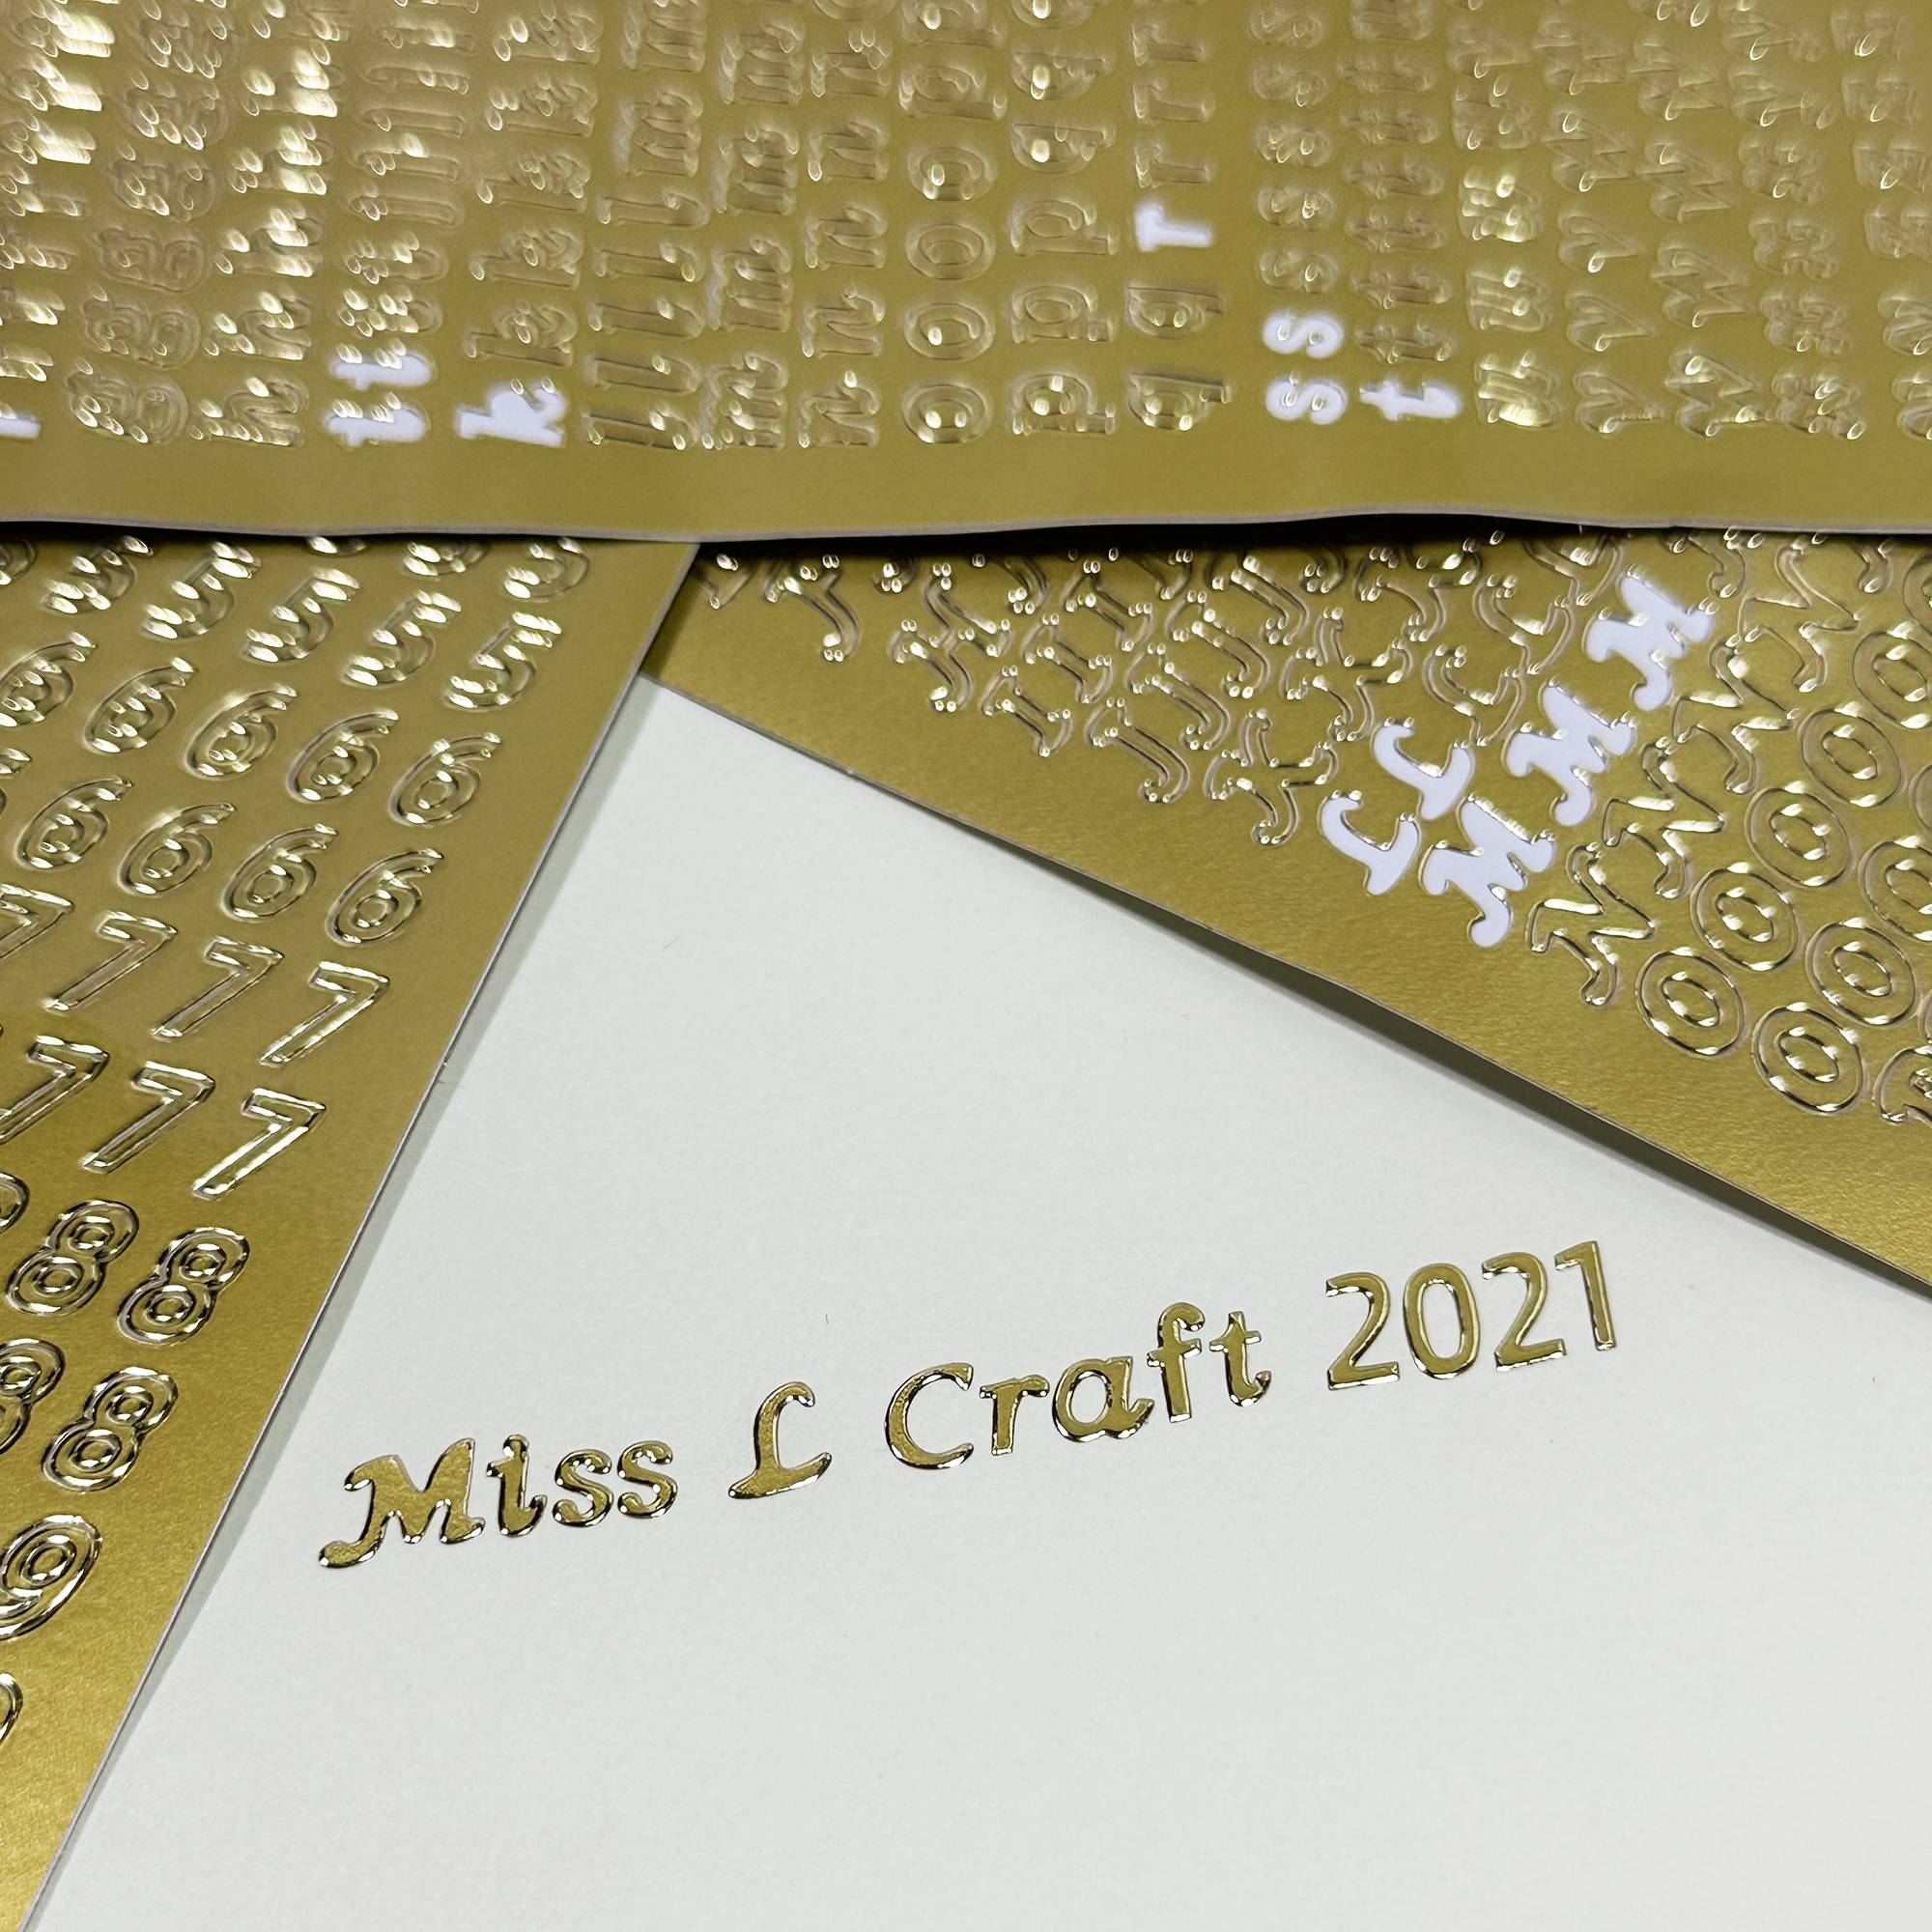 Metallic Cardboard Sheets in Gold Foil for Arts & Crafts Supplies